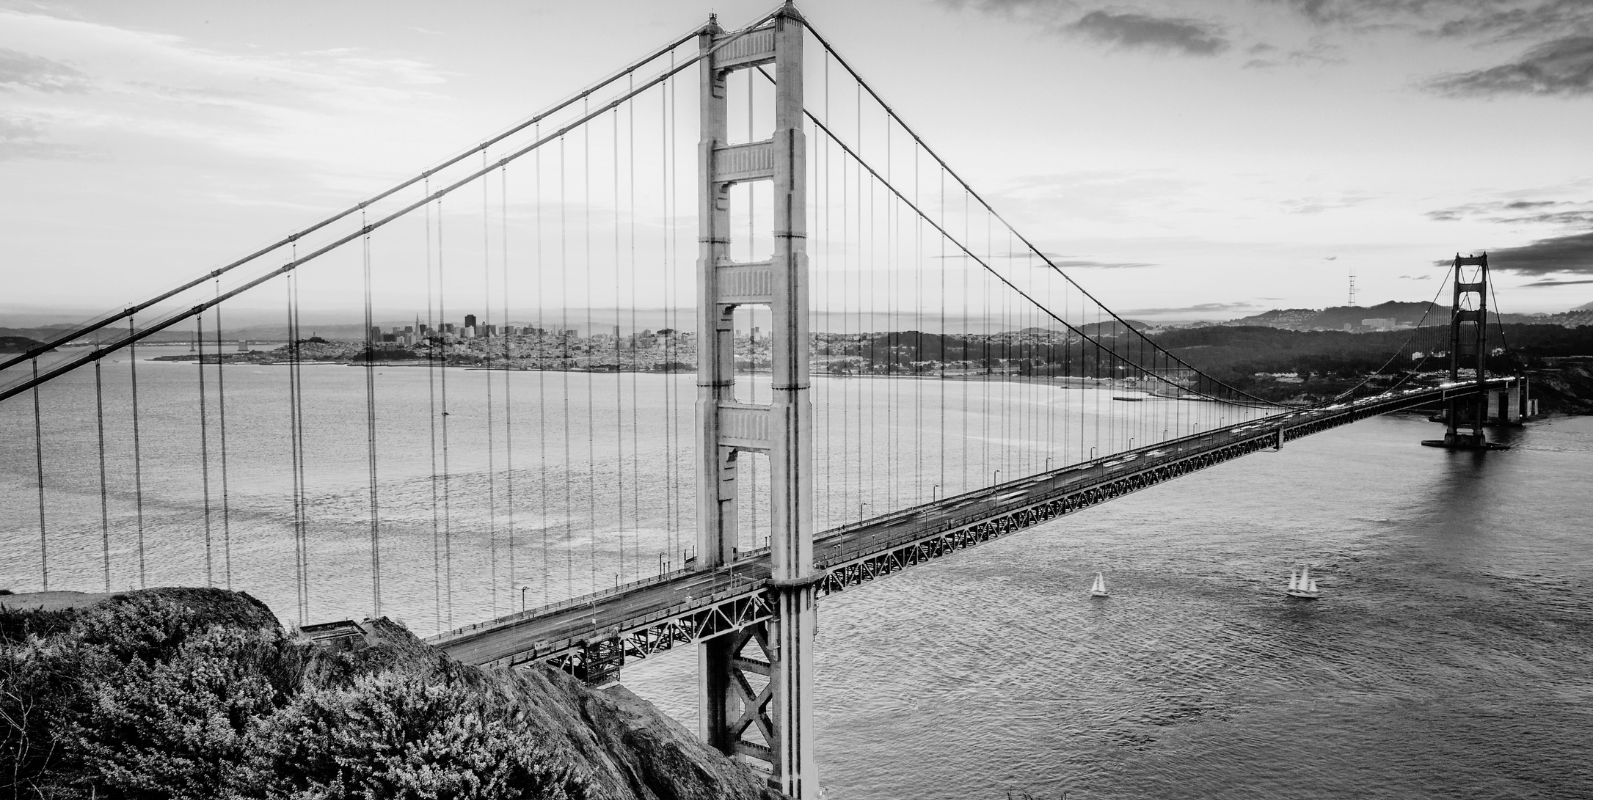 May 27th: The Golden State Bridge Opened Up To The Public